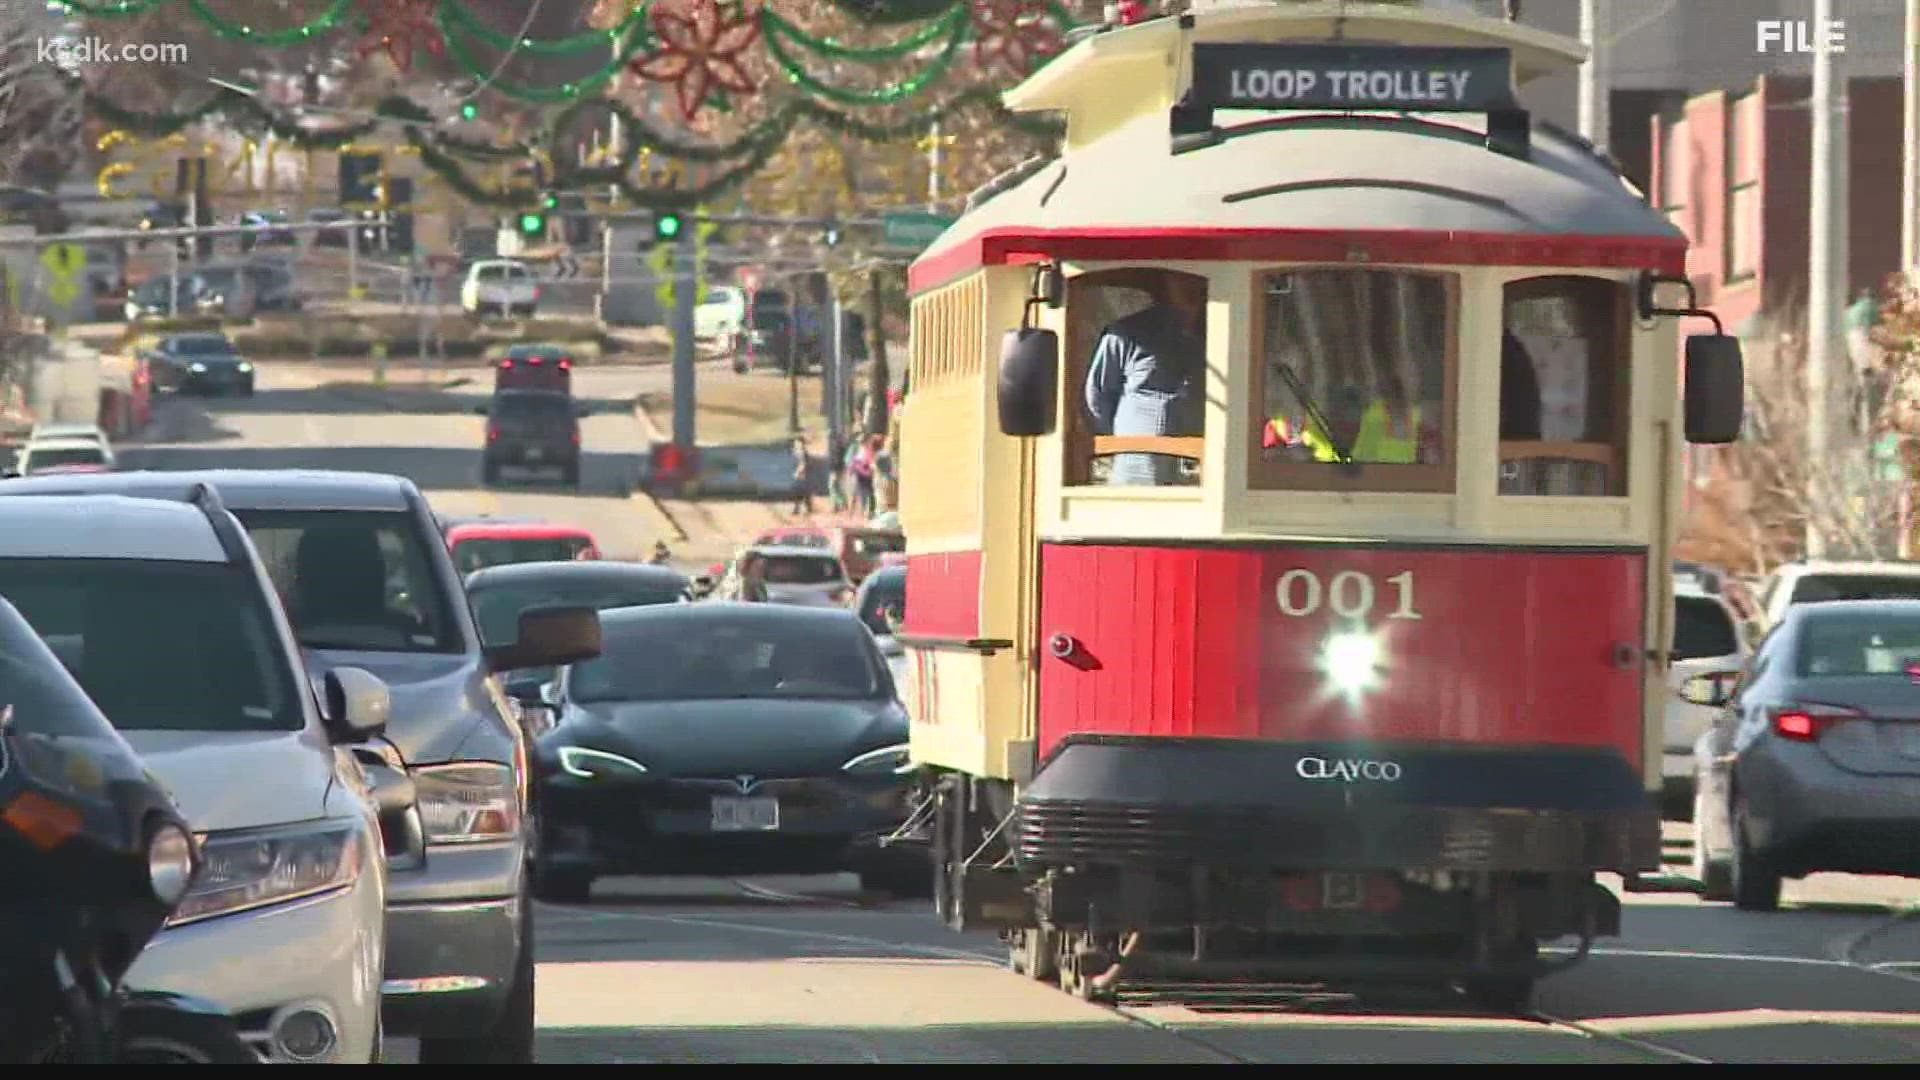 The federal government said it would ask for millions of dollars back from the city if the trolley was not running by June.